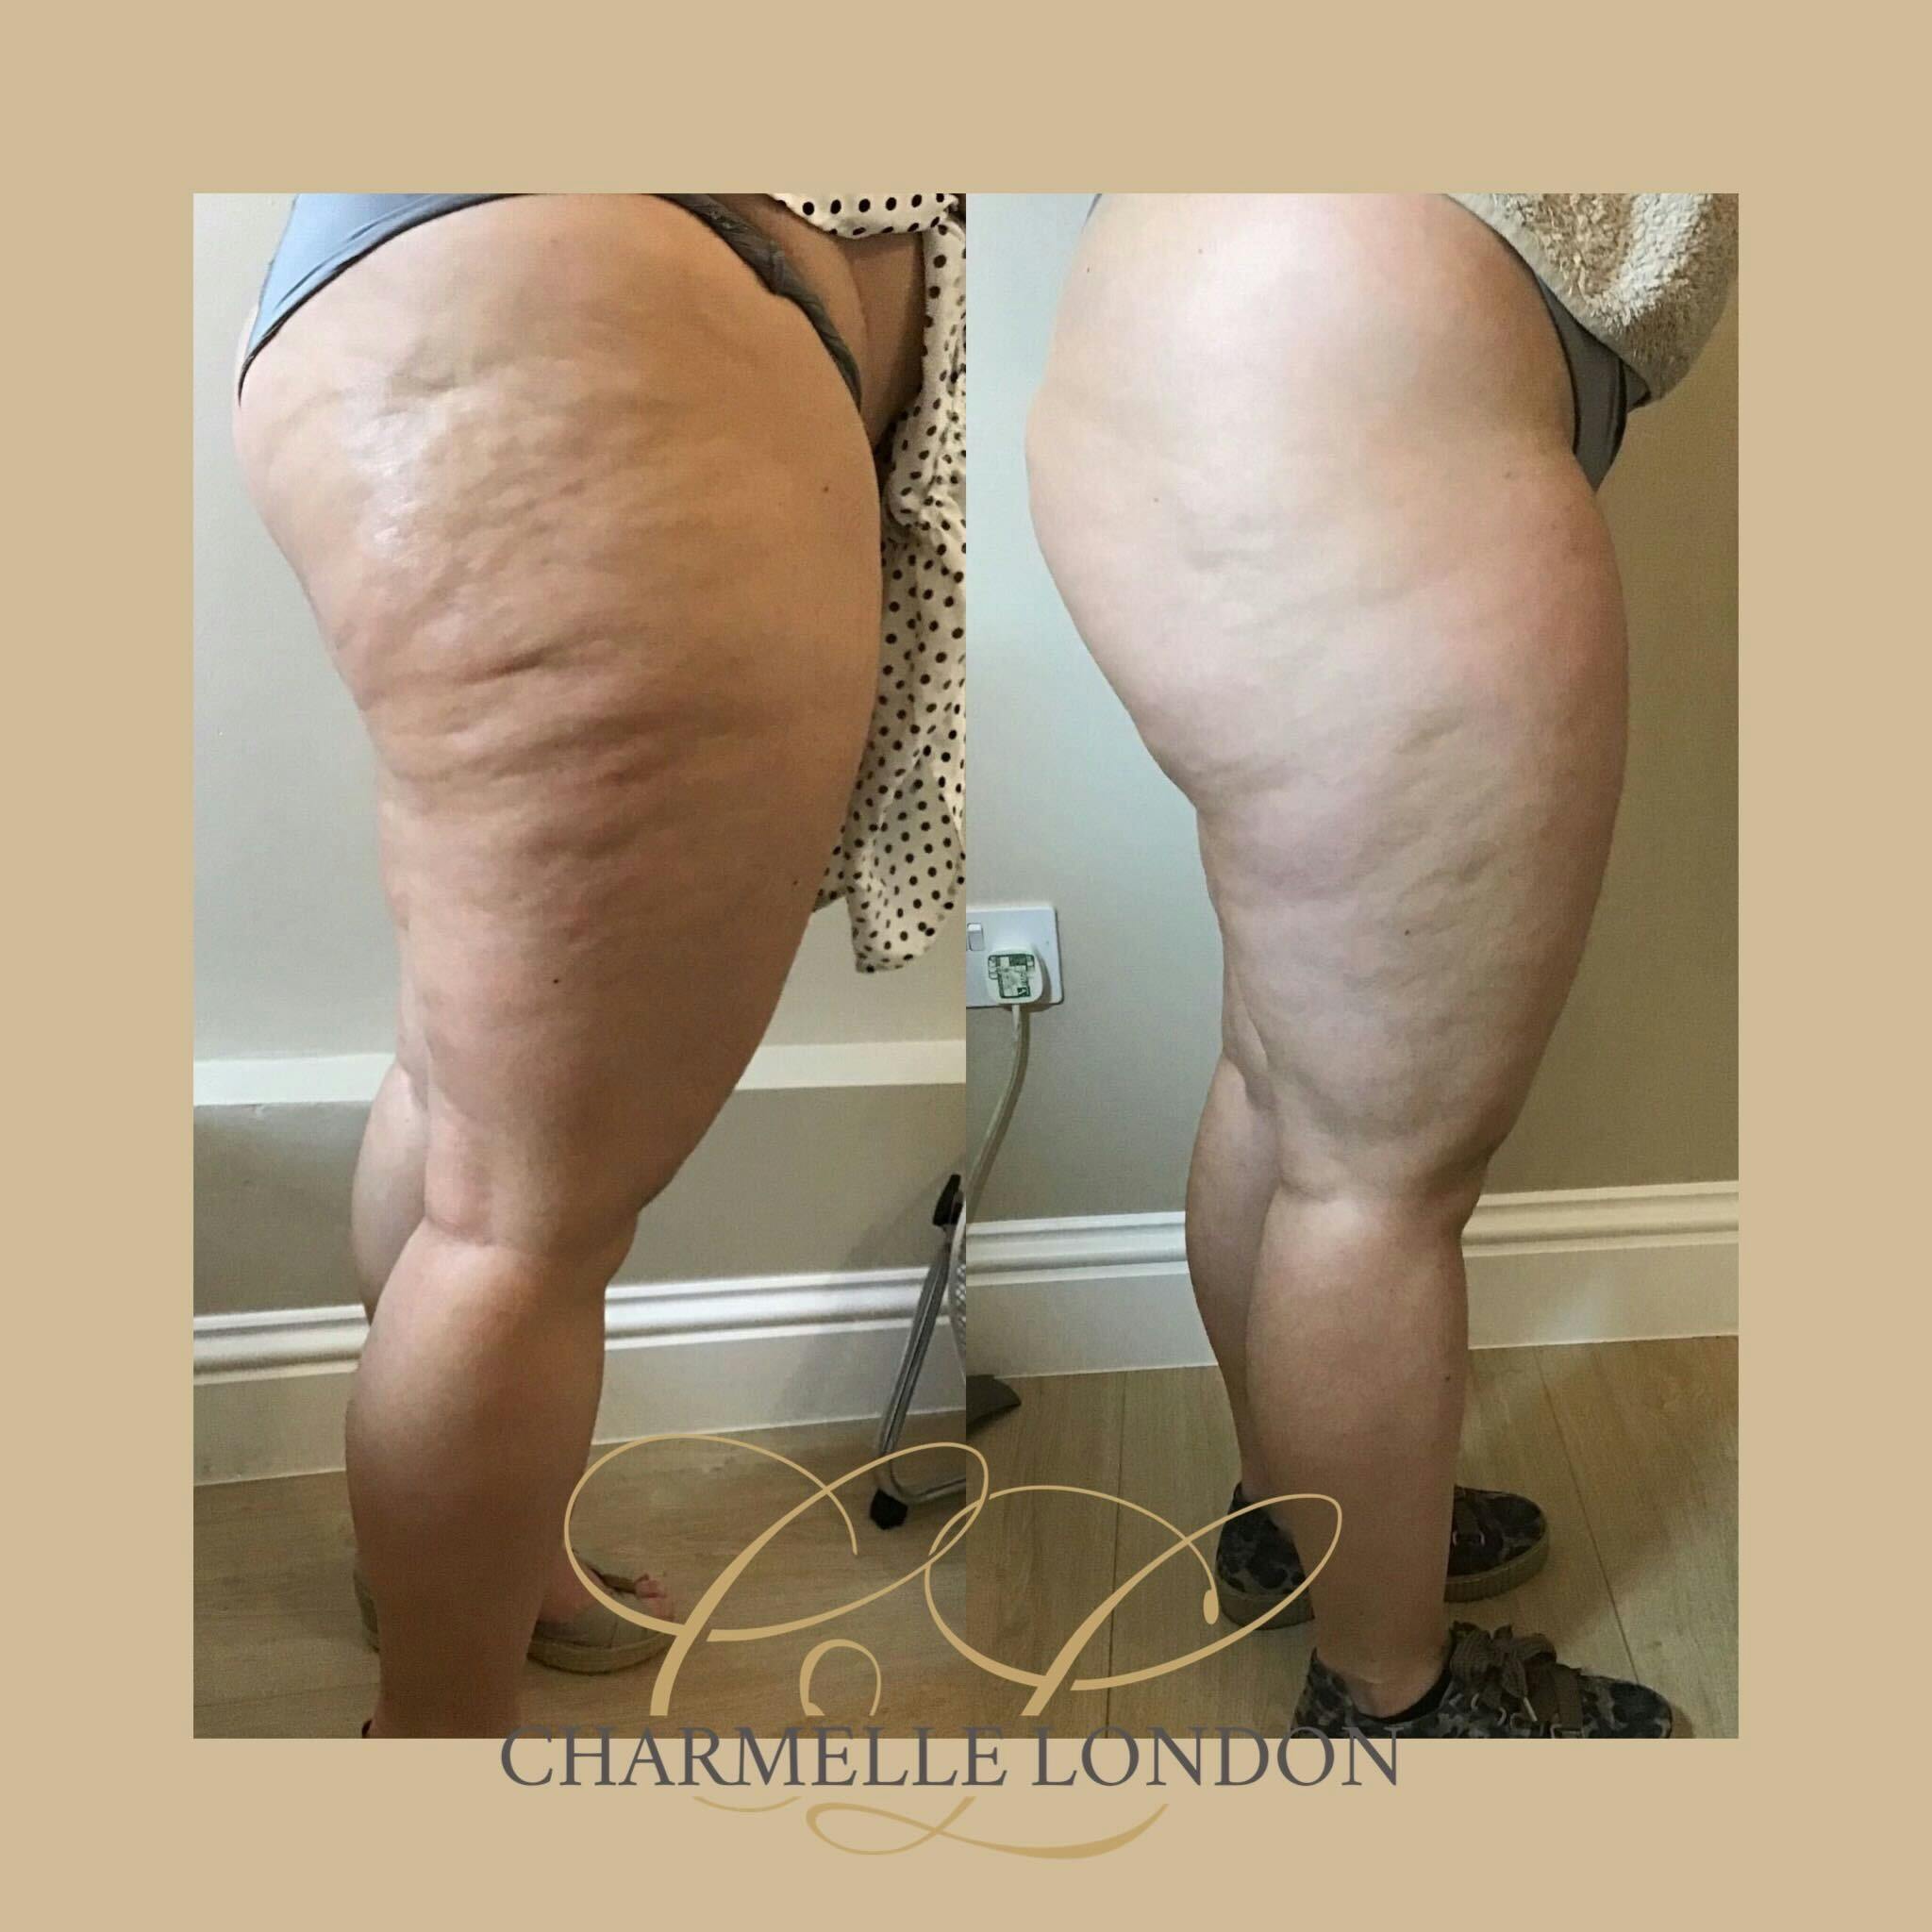 A prescriptive treatment tailored to meet your needs using a combination of 3D Shockwave and 3D radiofrequency is used to reduce cellulite.